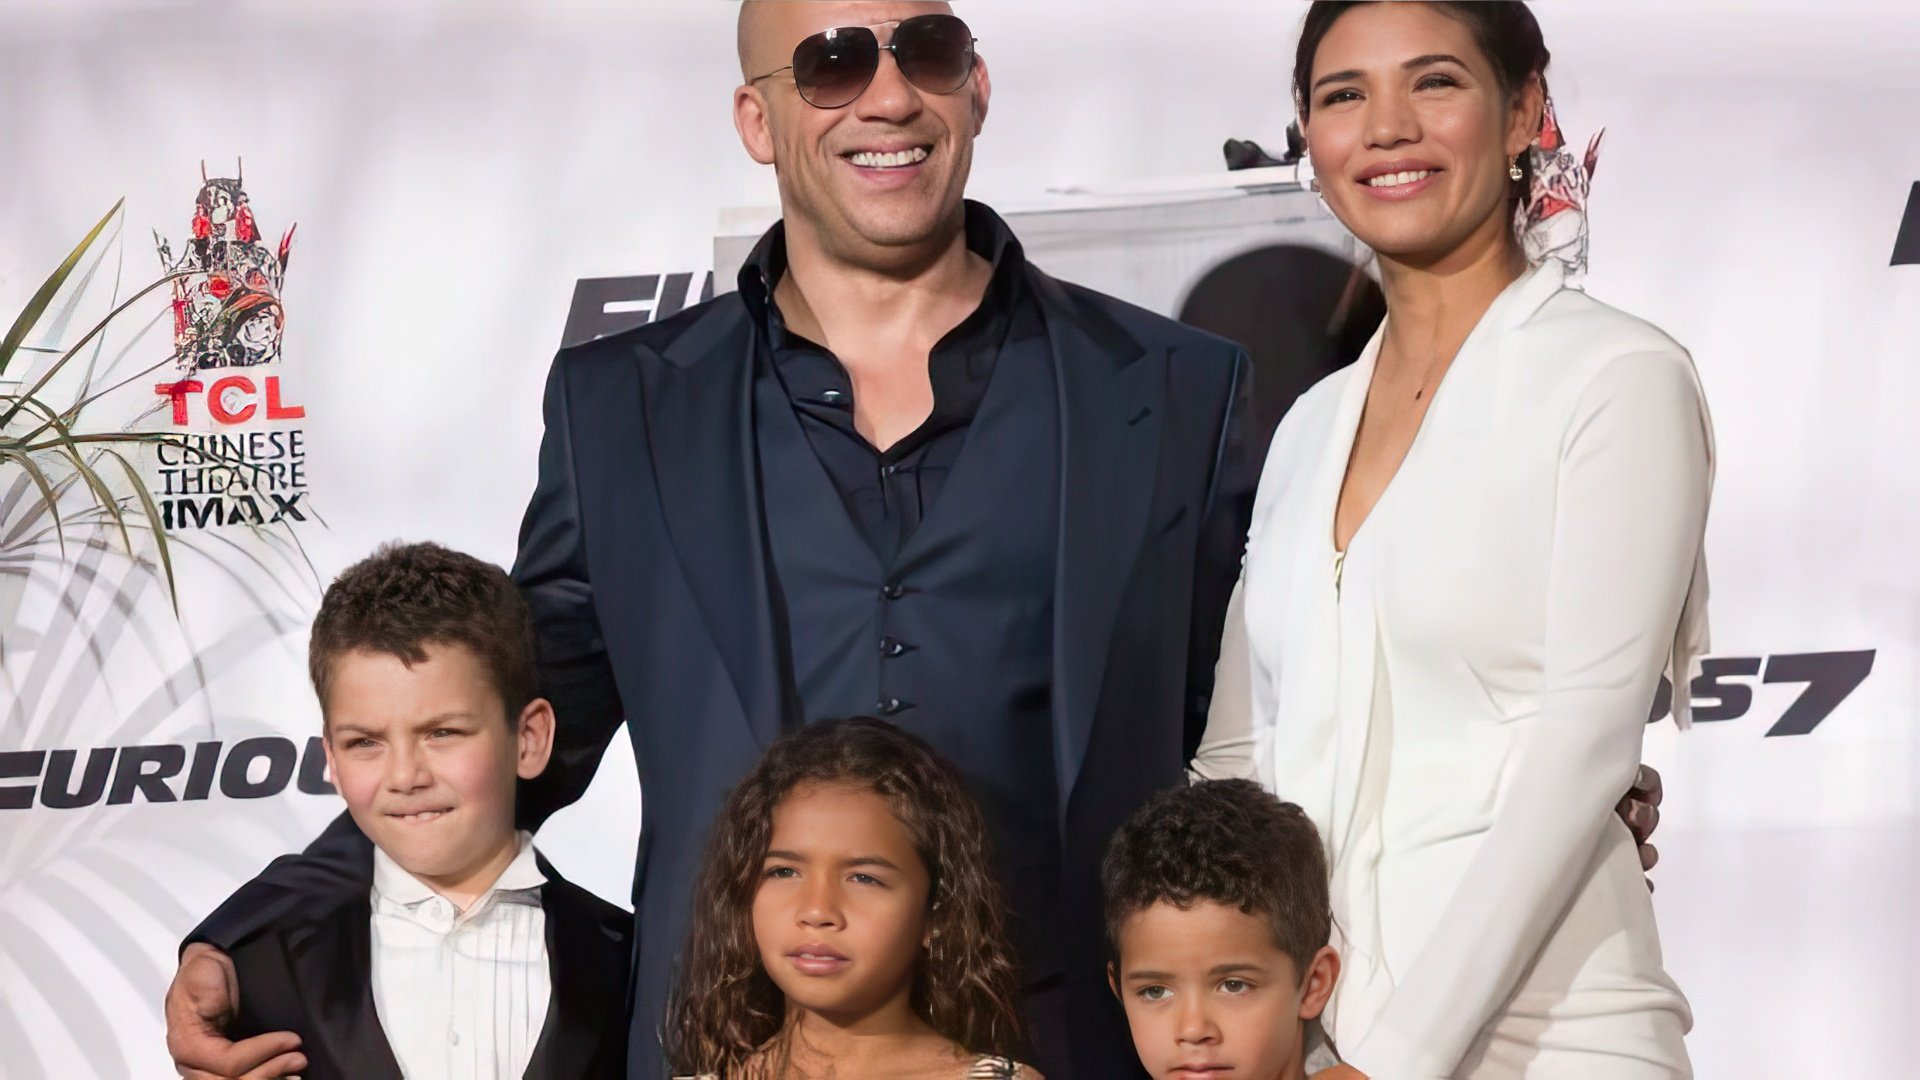 Vin Diesel with his wife and children